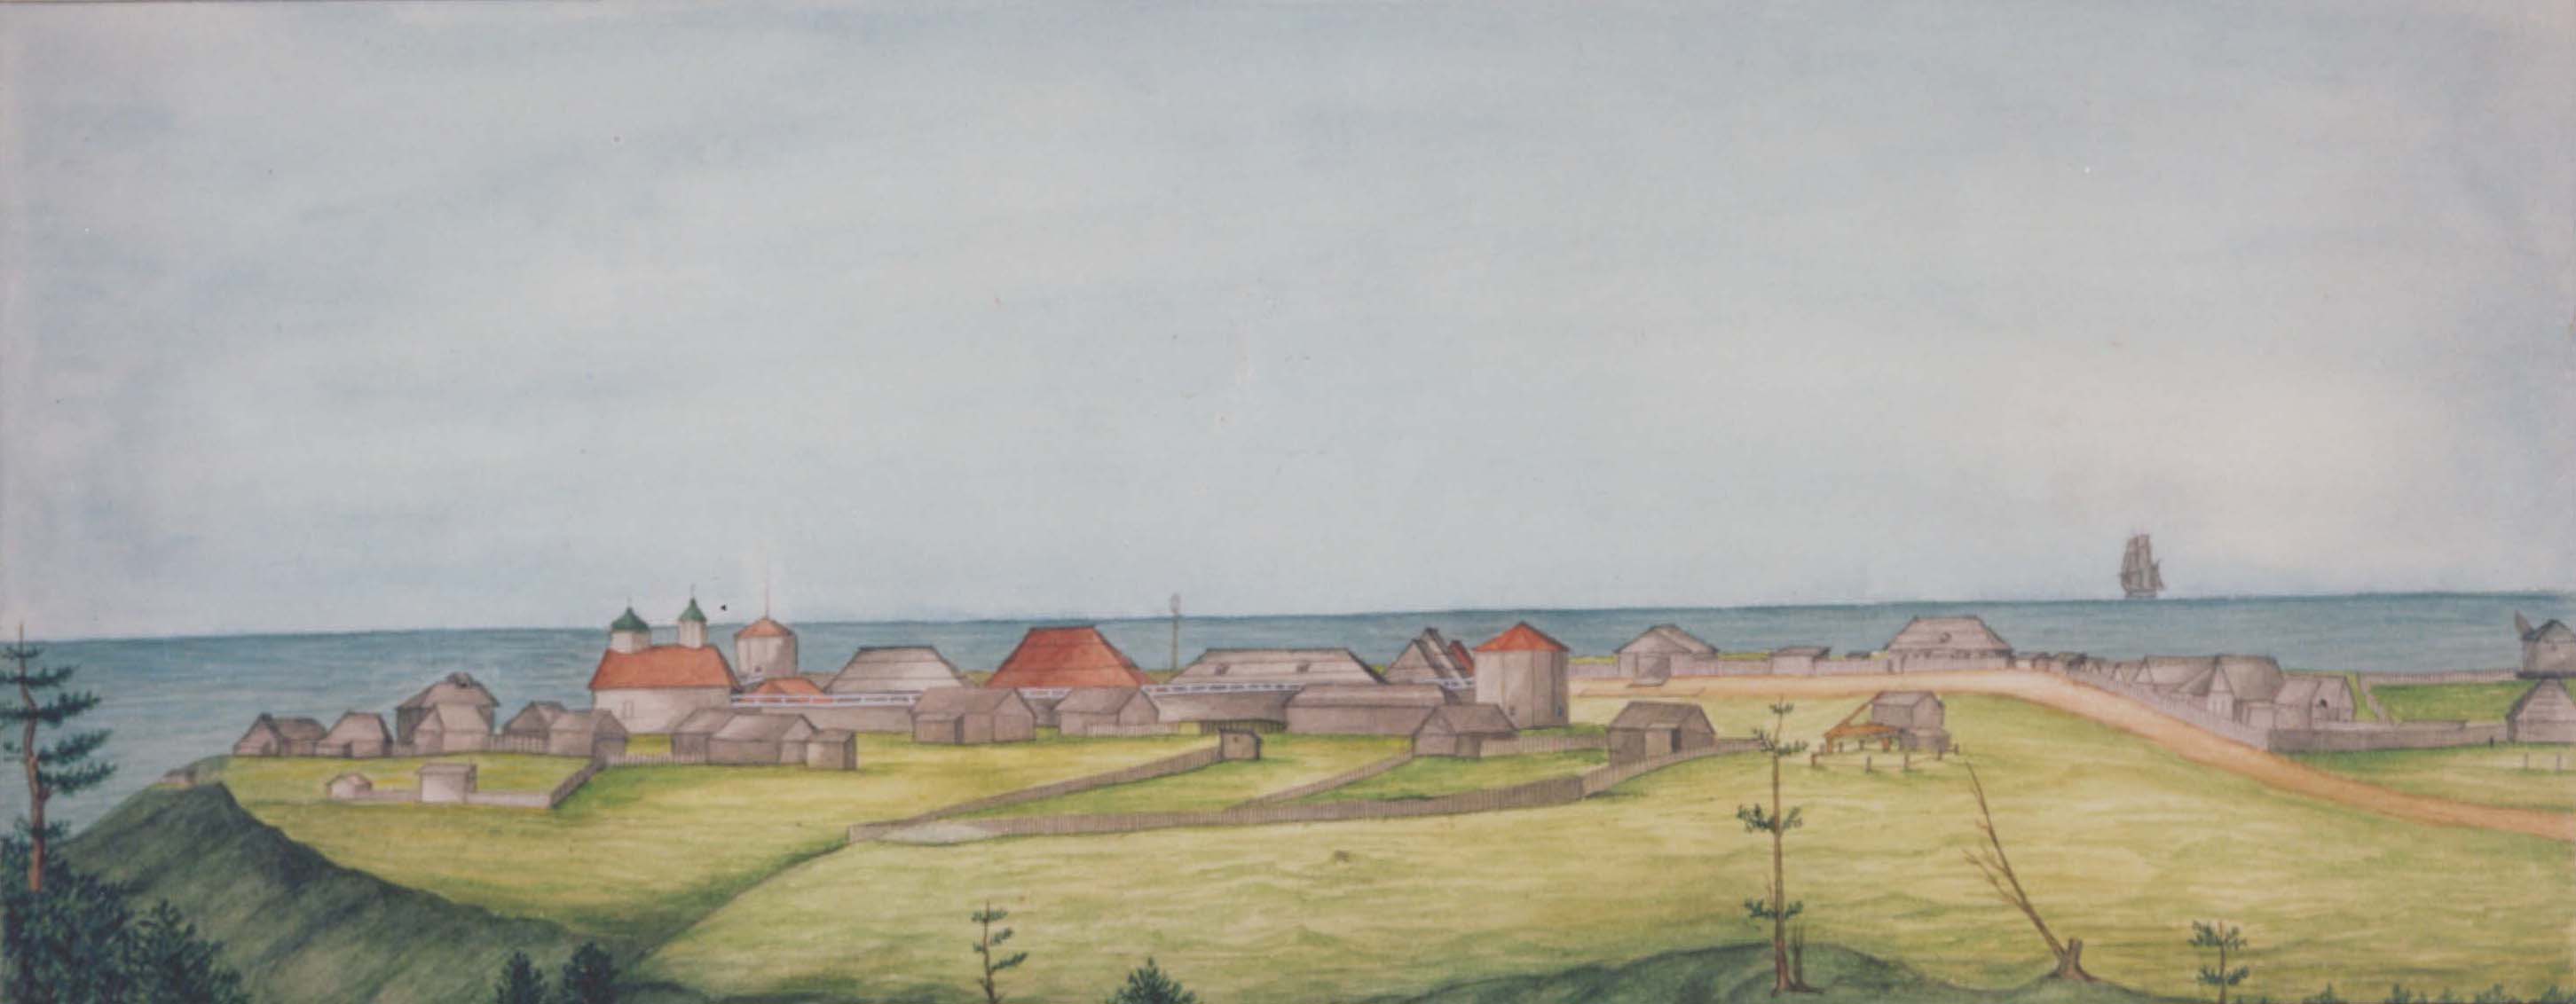 Watercolour of Fort Ross by I.G. Voznesenskii (1841)  Source: Peter the Great Museum of Anthropology and Ethnography, St.Petersburg